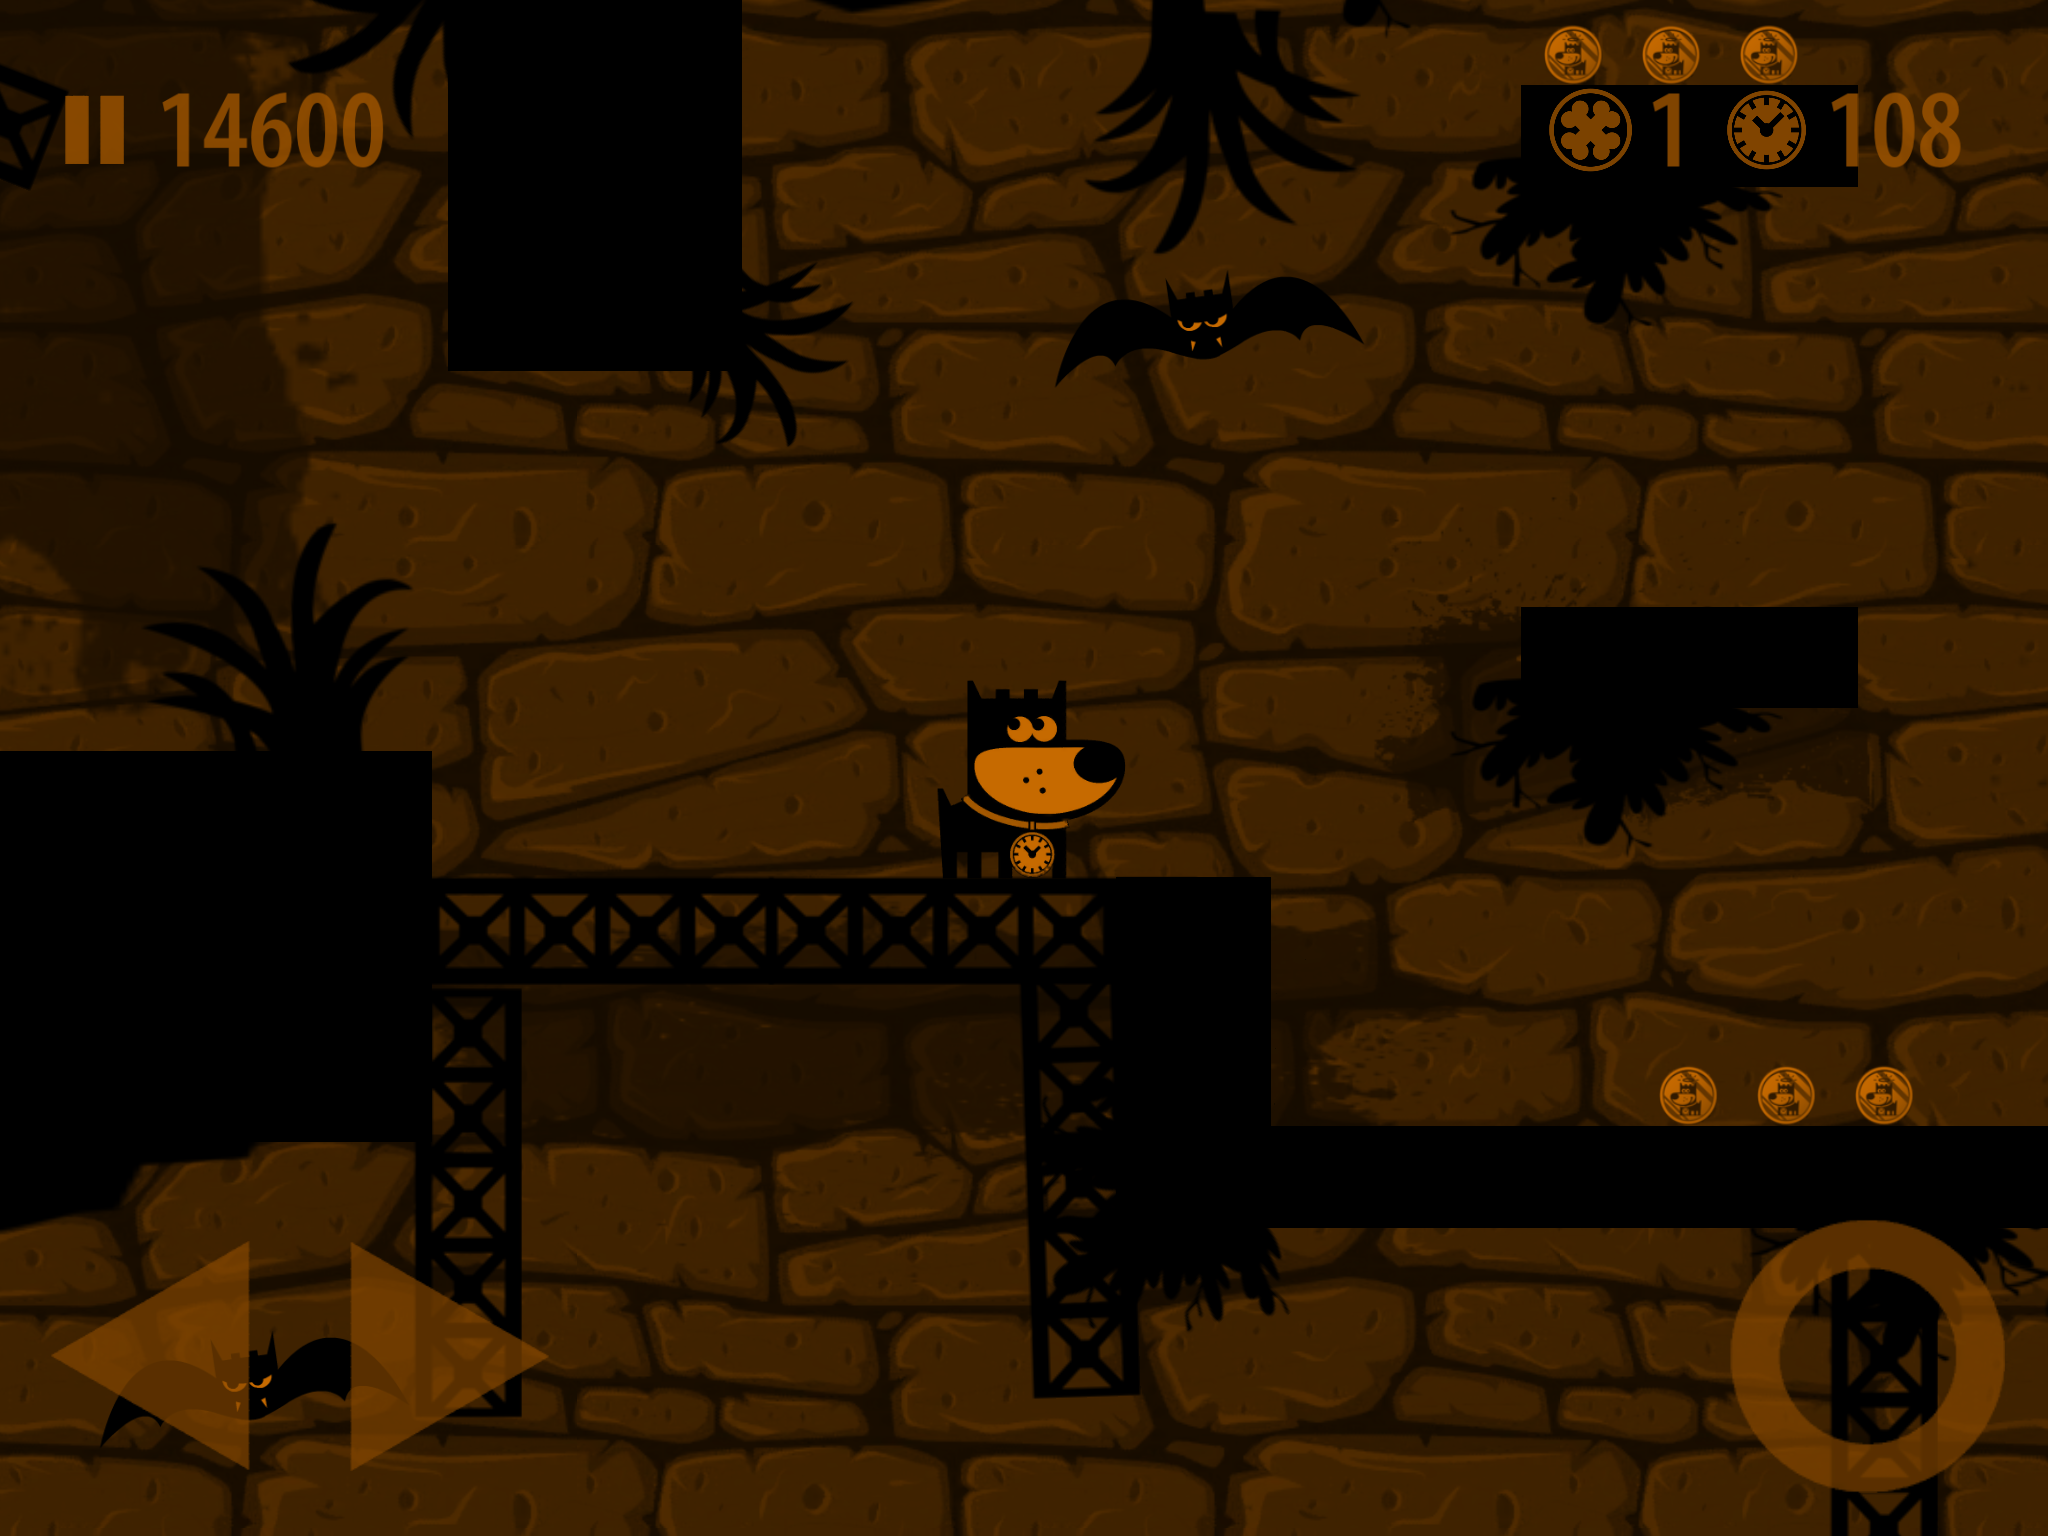 Retro-Platform-Action-Adventure-Game-GOOD-PUPPY-CLUELESS-6-Free-Download.PNG